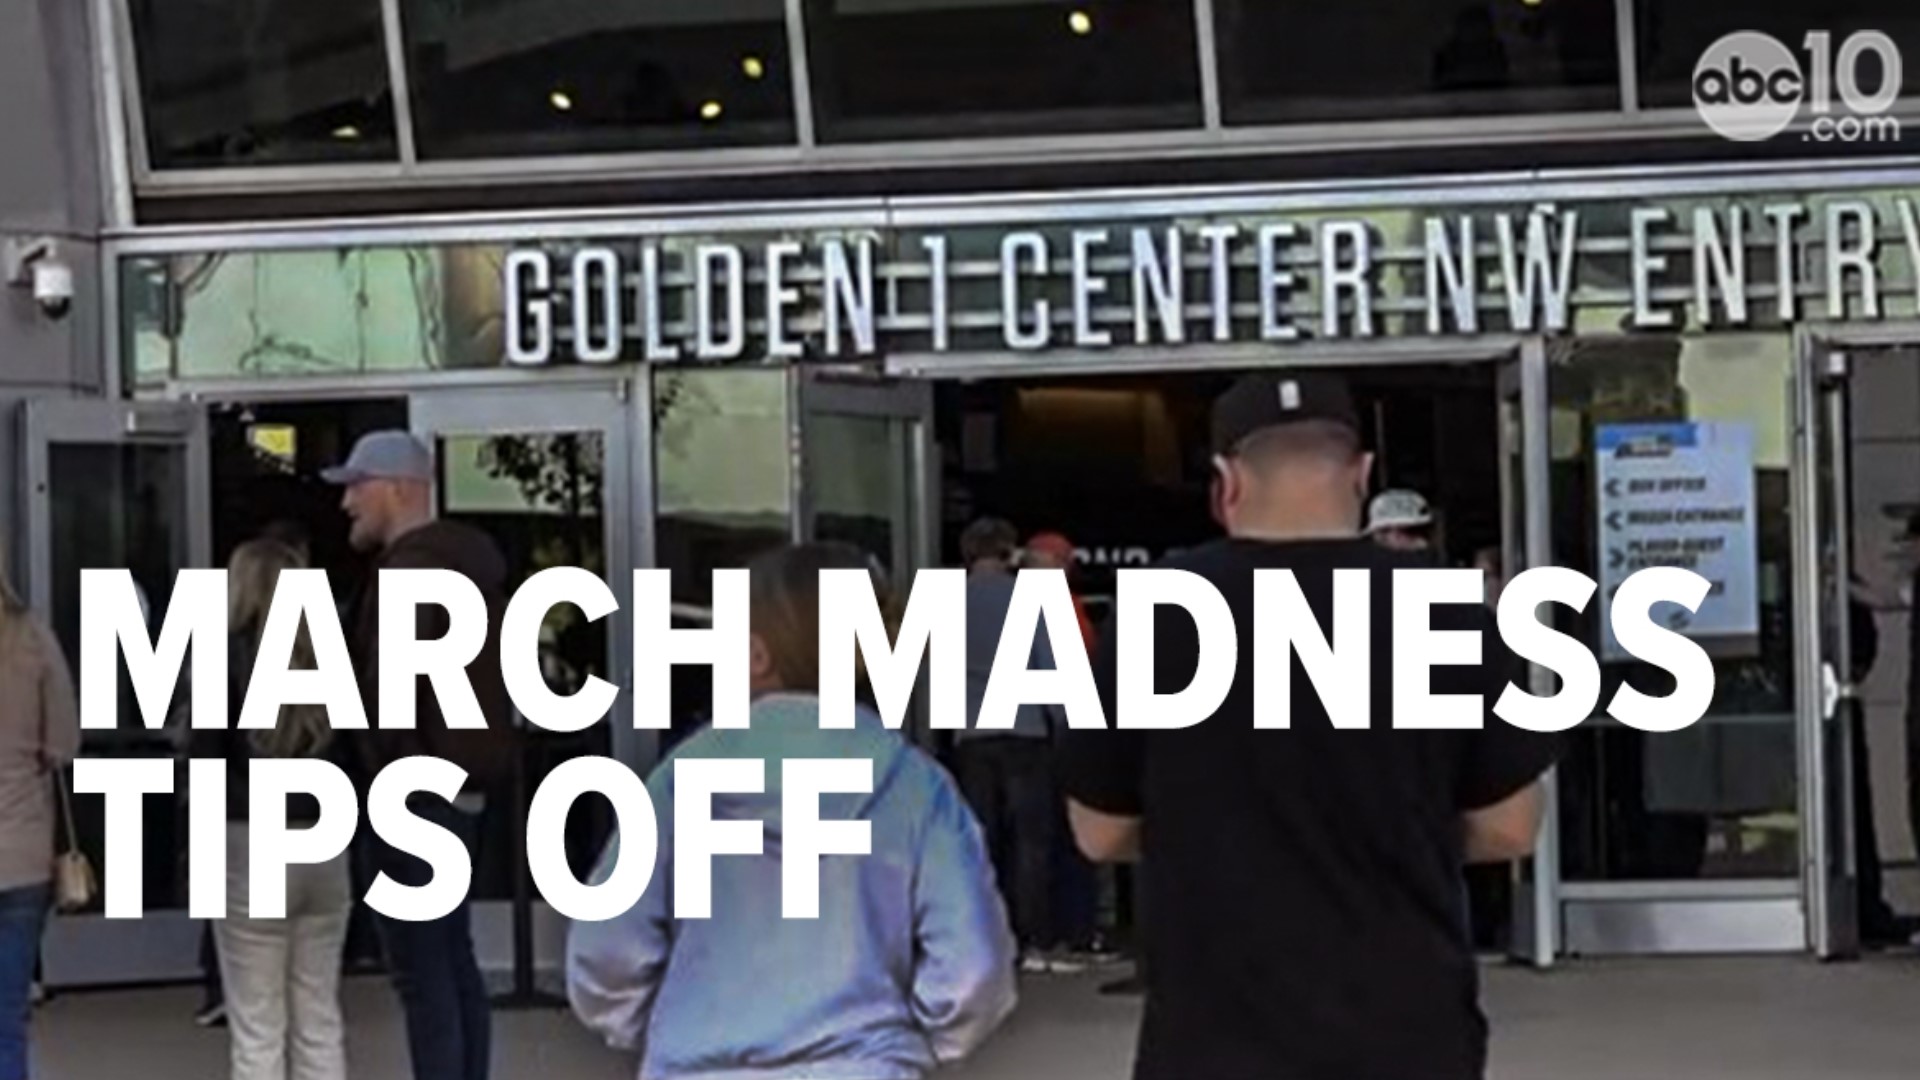 More than 11,000 hotel rooms were booked specifically for fans coming down to Sacramento for the 6 March Madness games, according to Visit Sacramento.